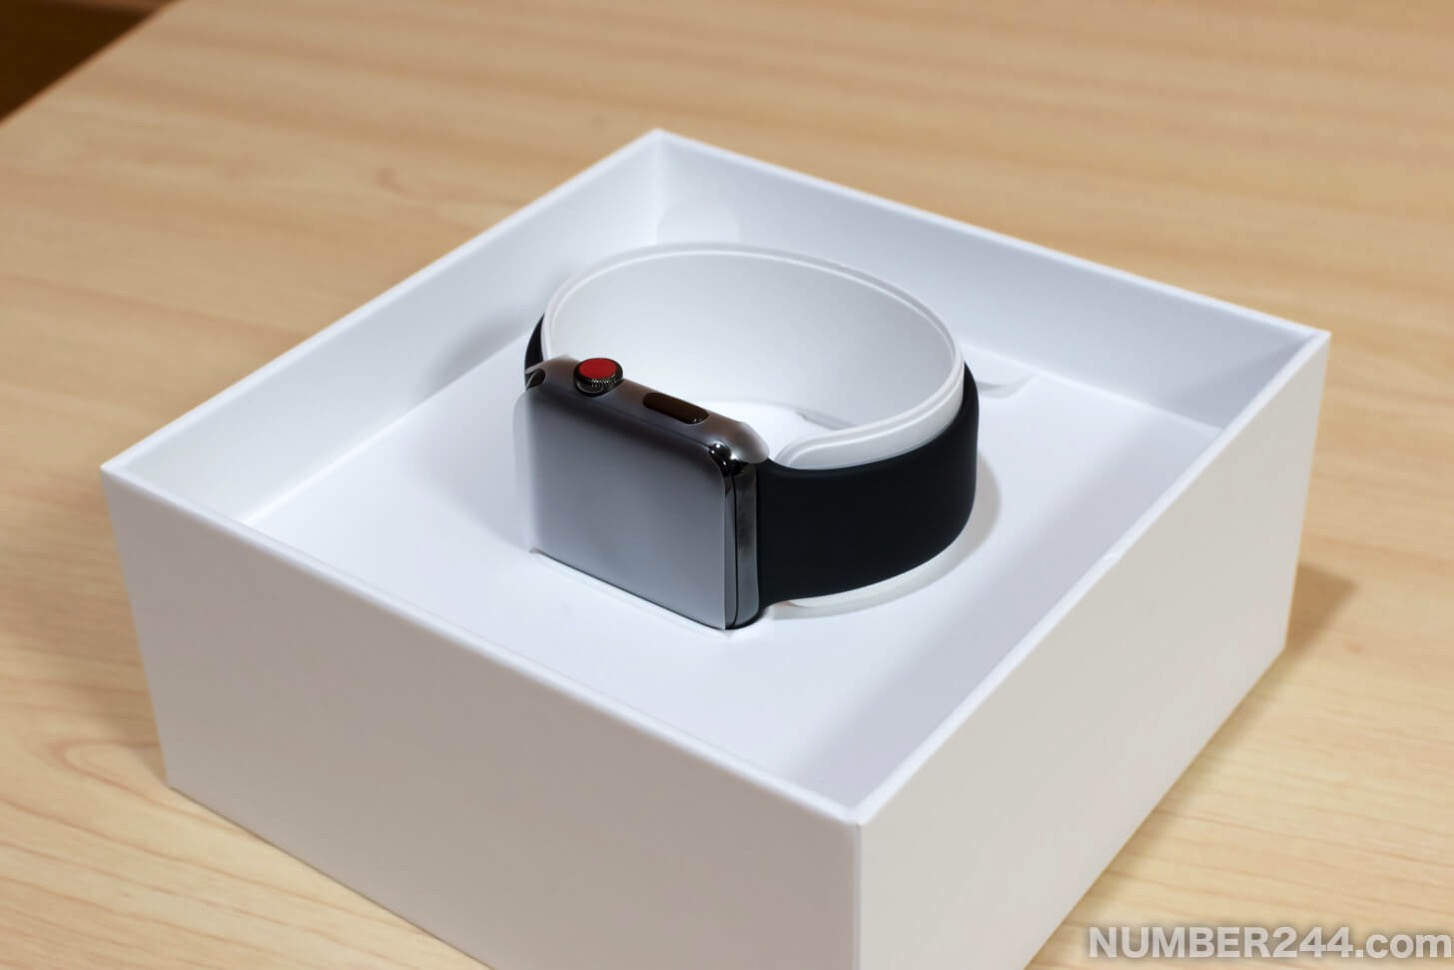 Apple Watch Series 3 unboxing9